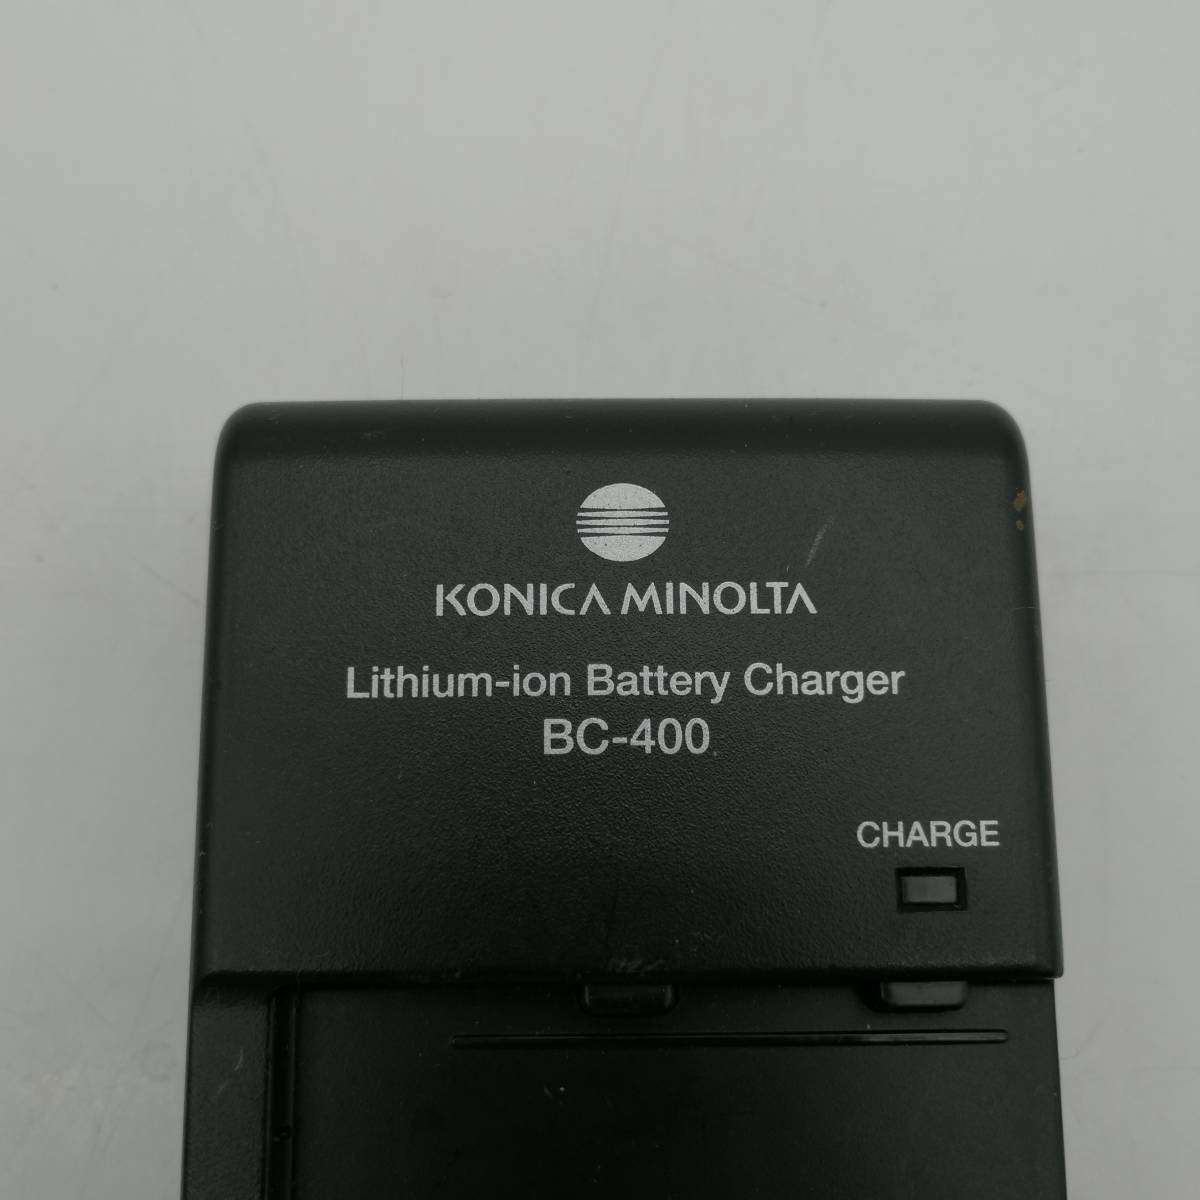 t2588 MINOLTA BC-400 Minolta KONICA MINOLTA Konica Minolta charger battery charger 2 piece set present condition goods secondhand goods 